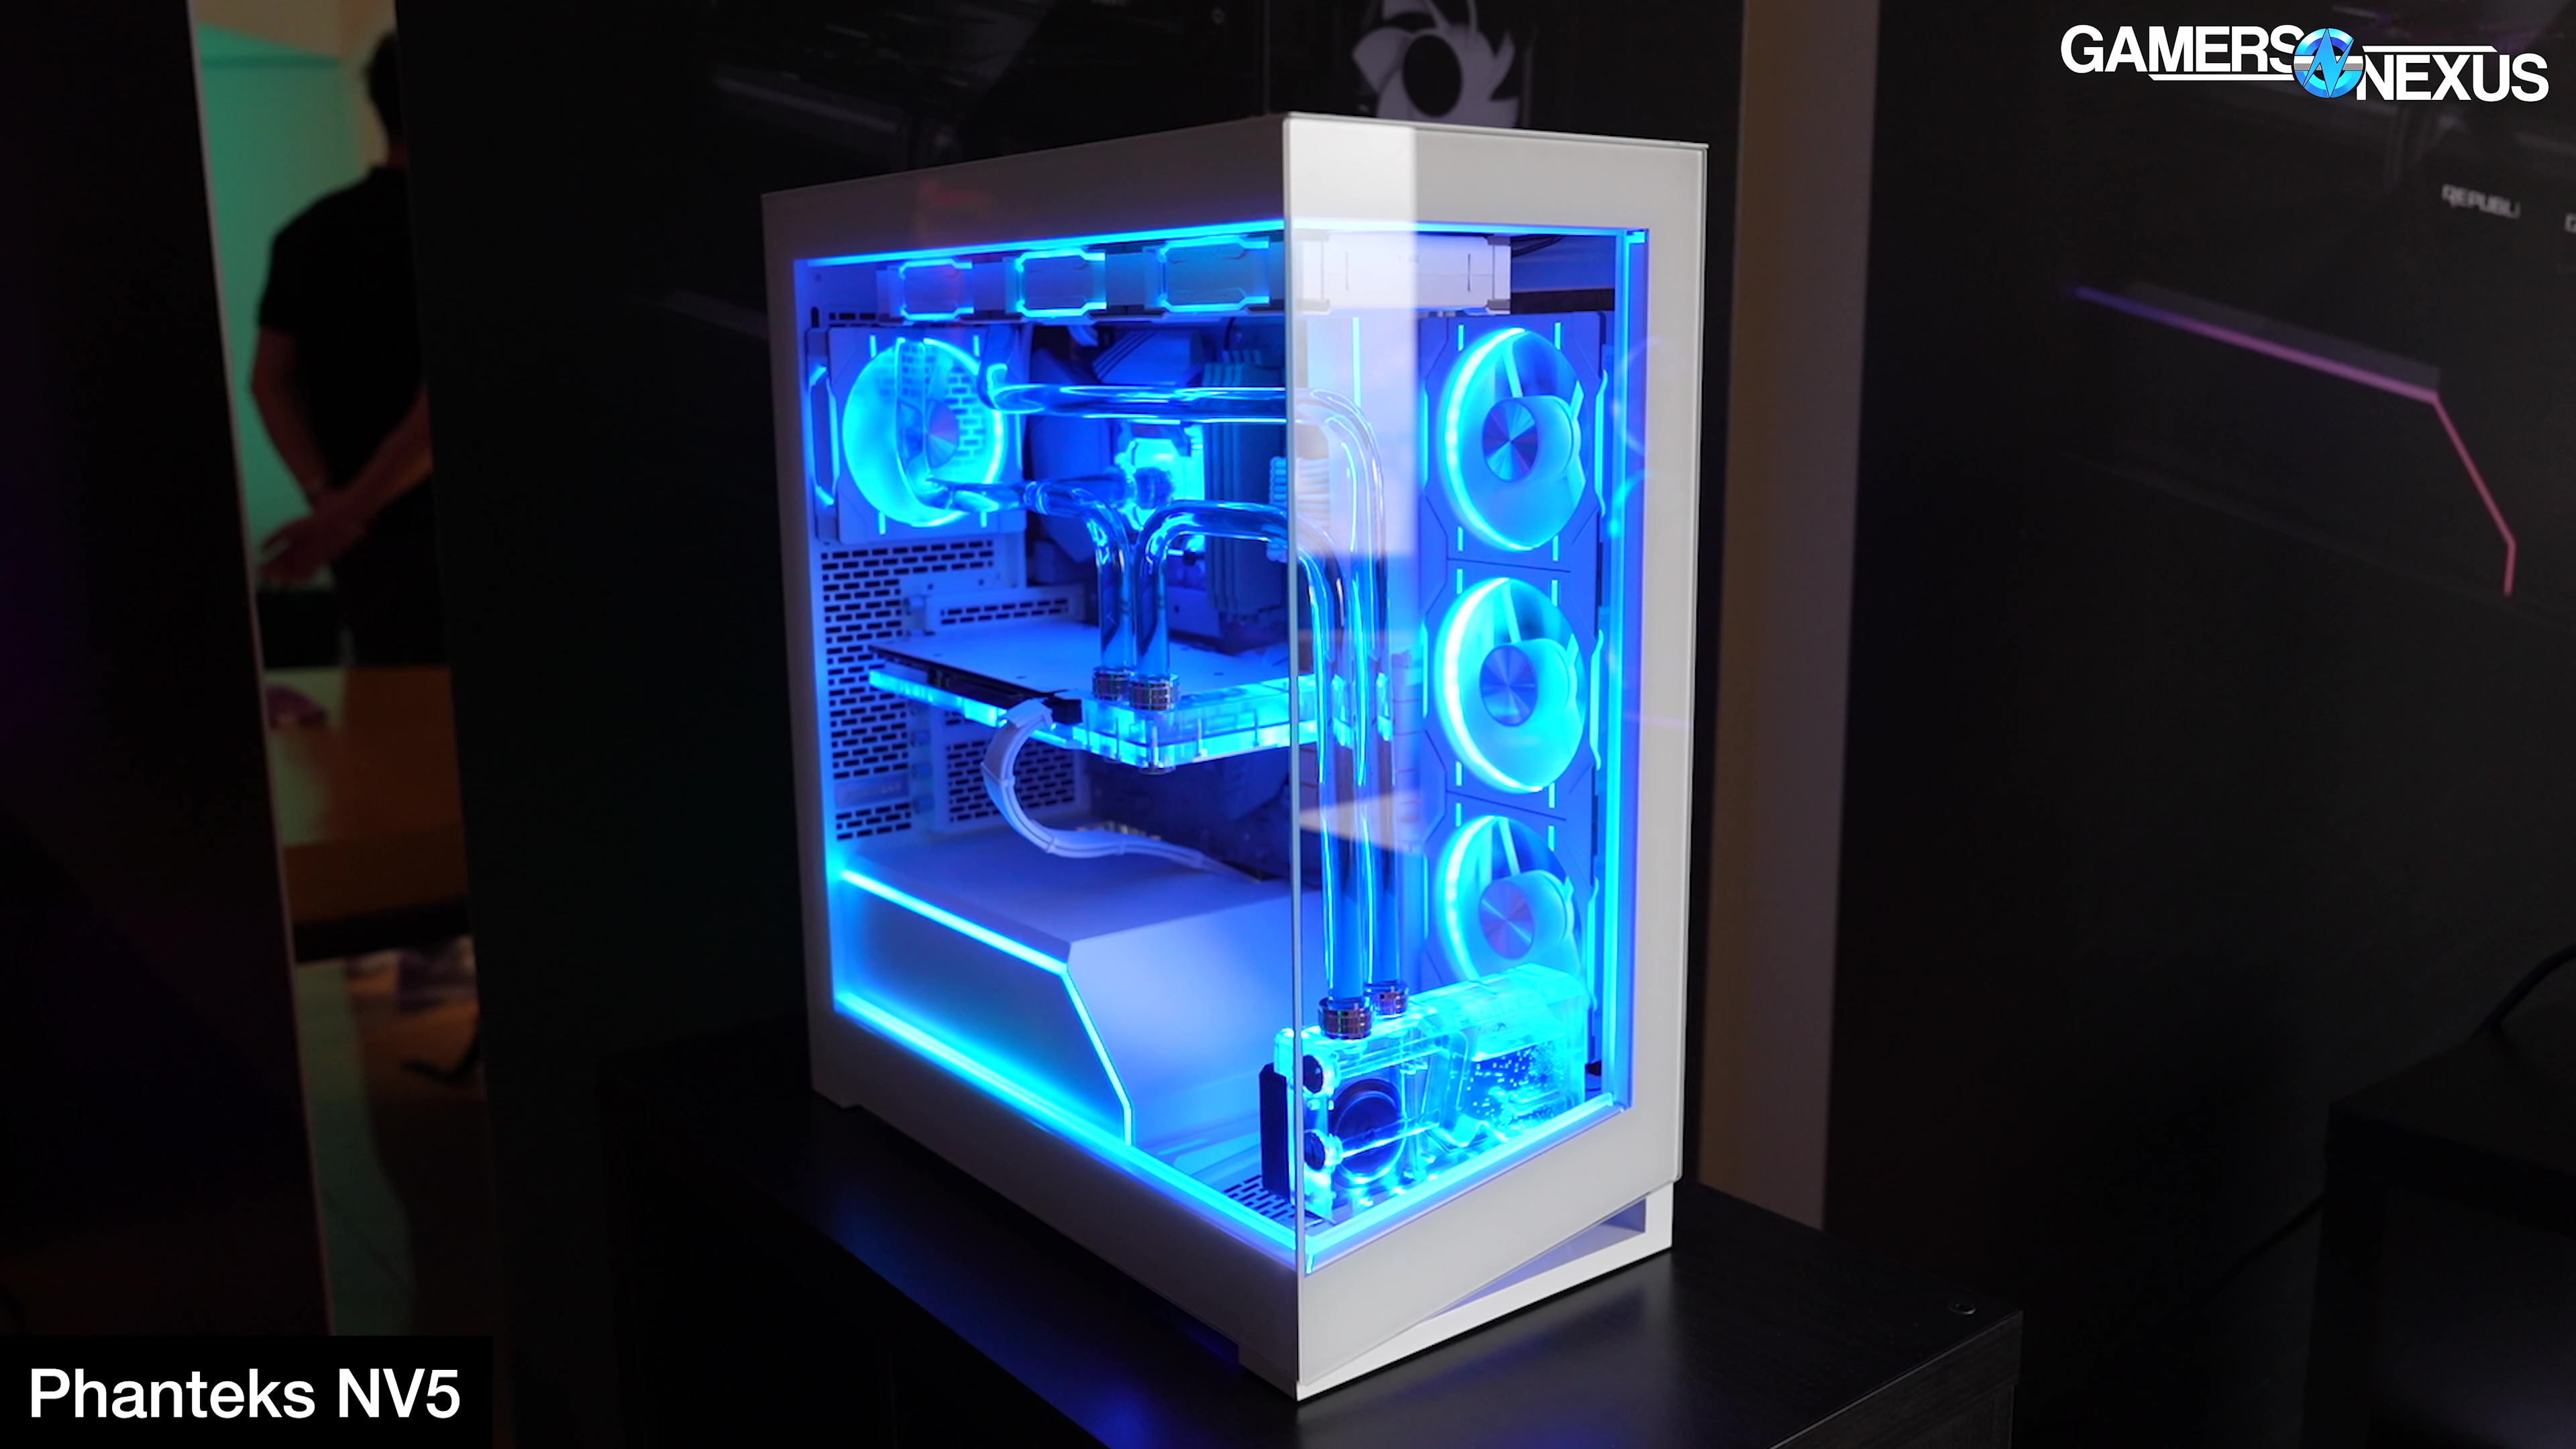 The best PC cases of 2023